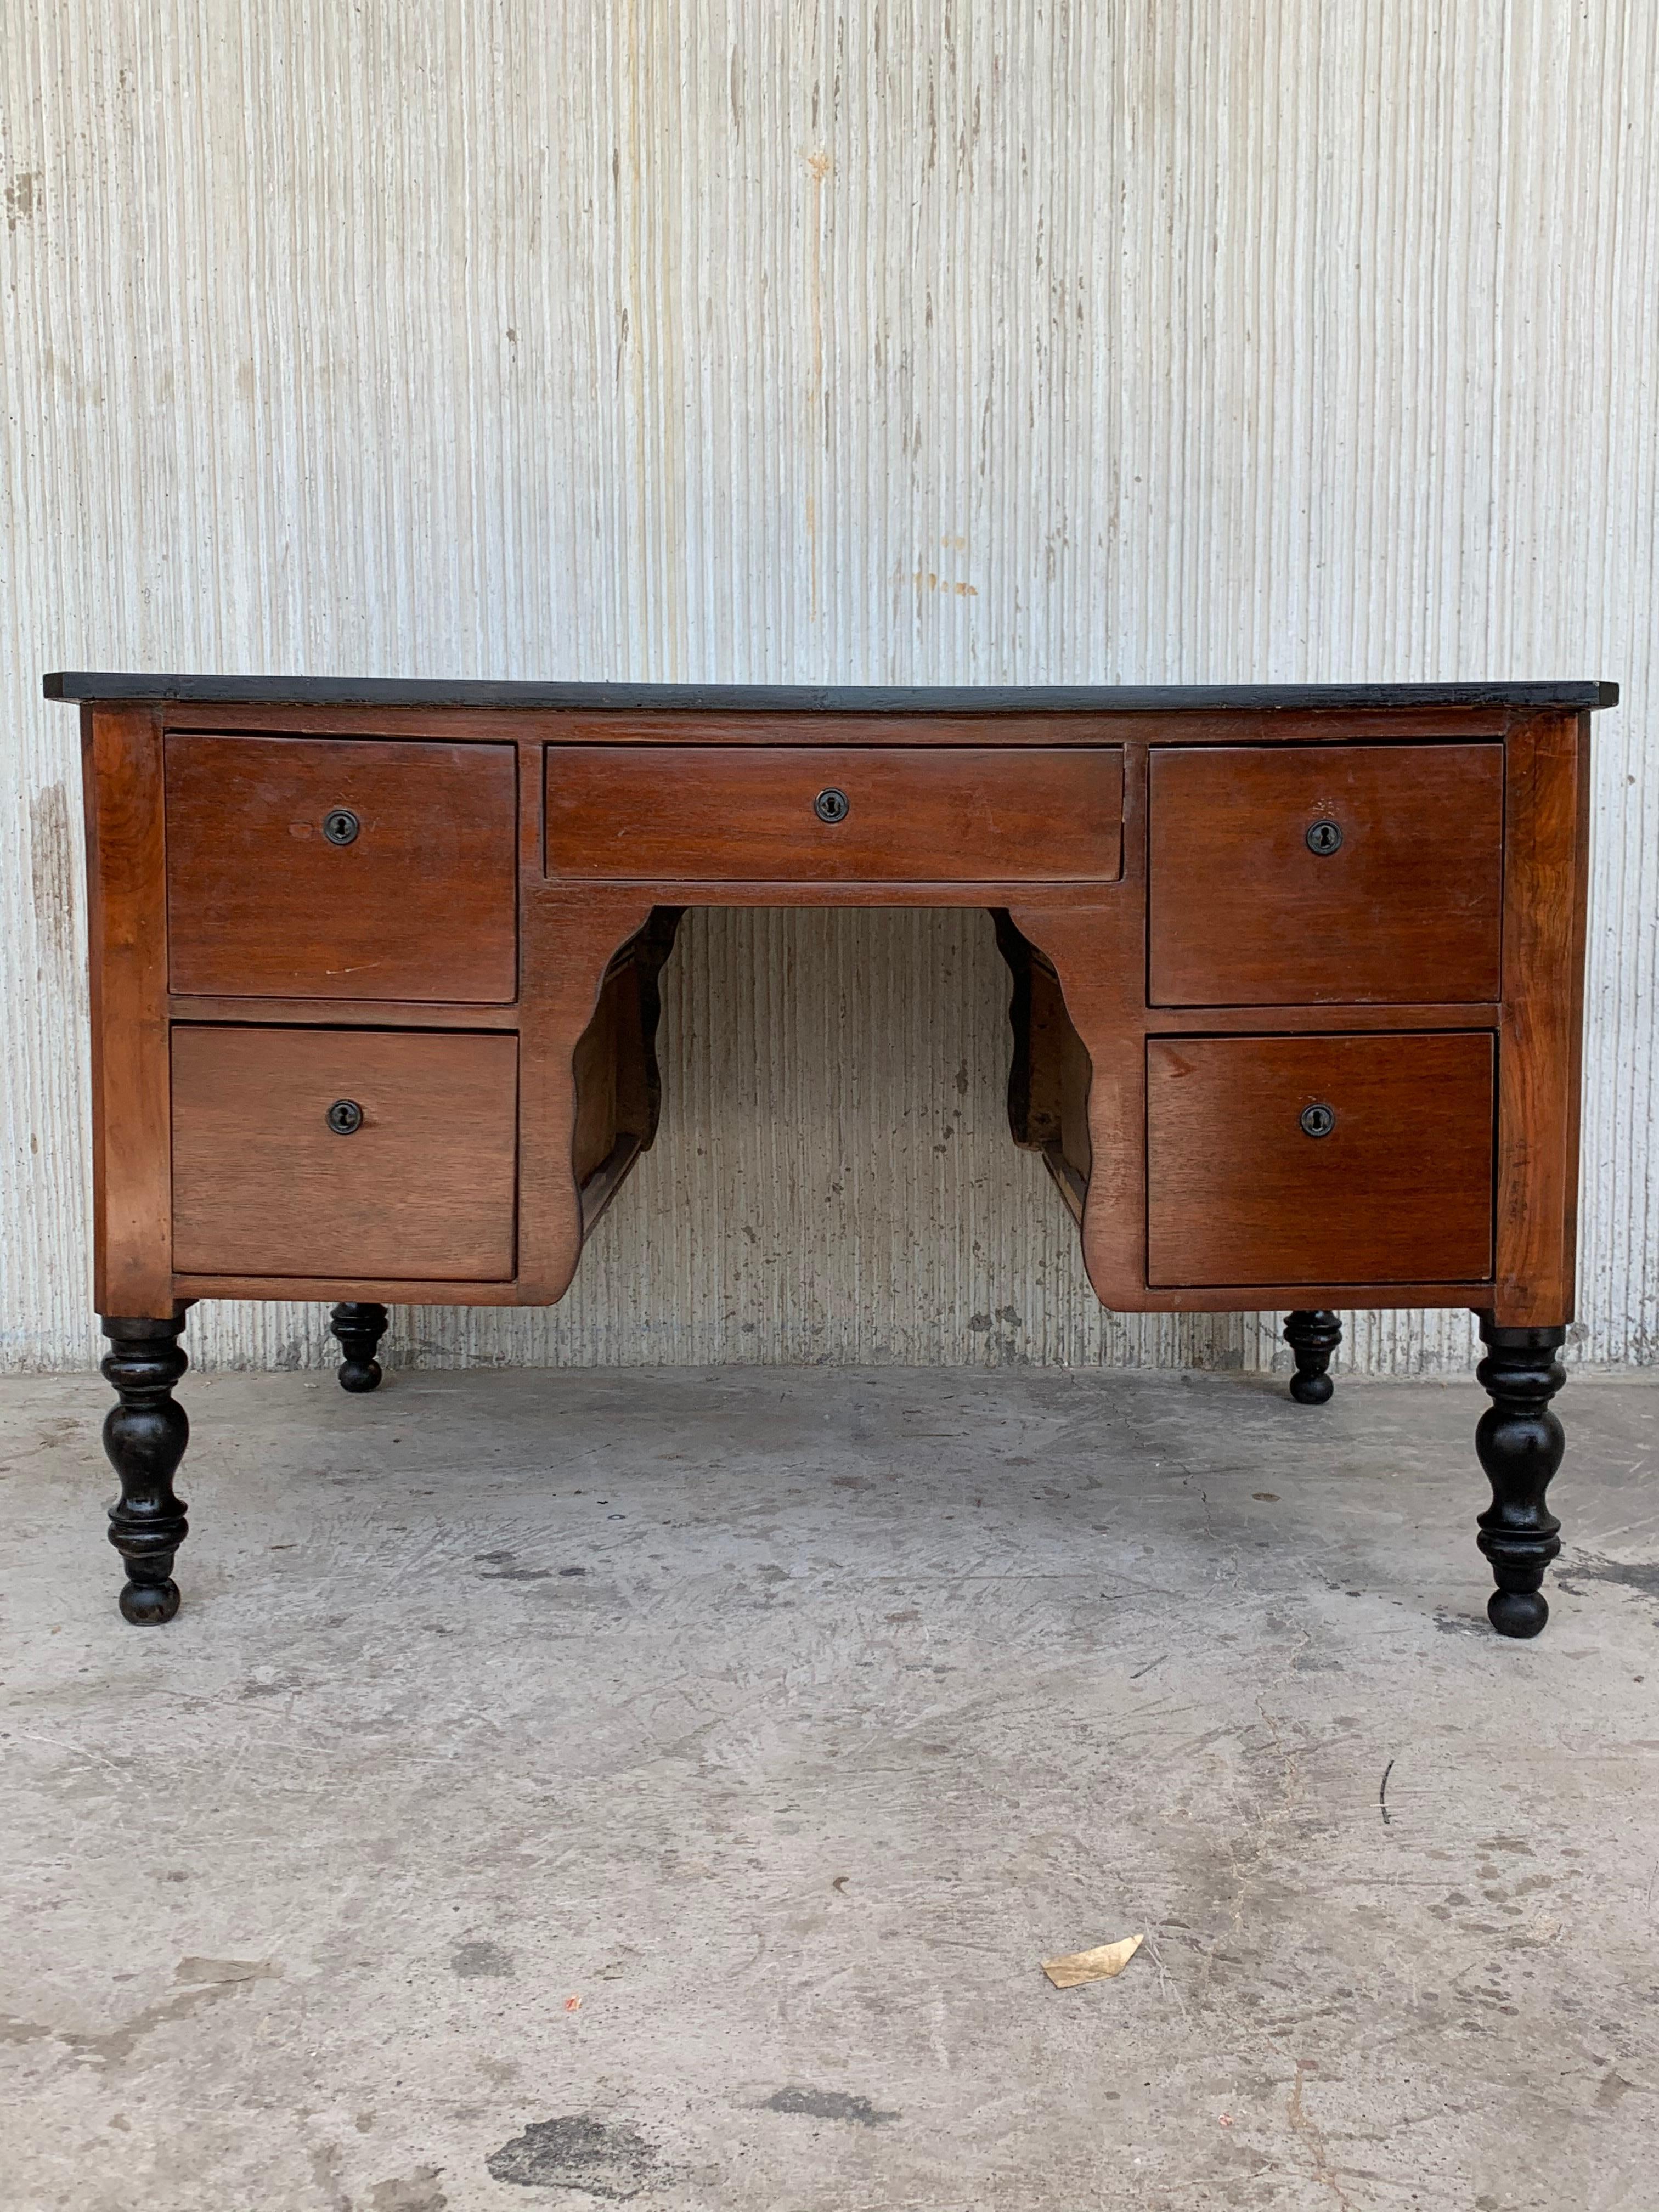 This early (circa 1830) French Provincial plantation style walnut secretary desk
This is an especially fine piece of furniture made from fine quality figured fiddle back mahogany with mahogany lined drawers and a desk drawer with writing slope and